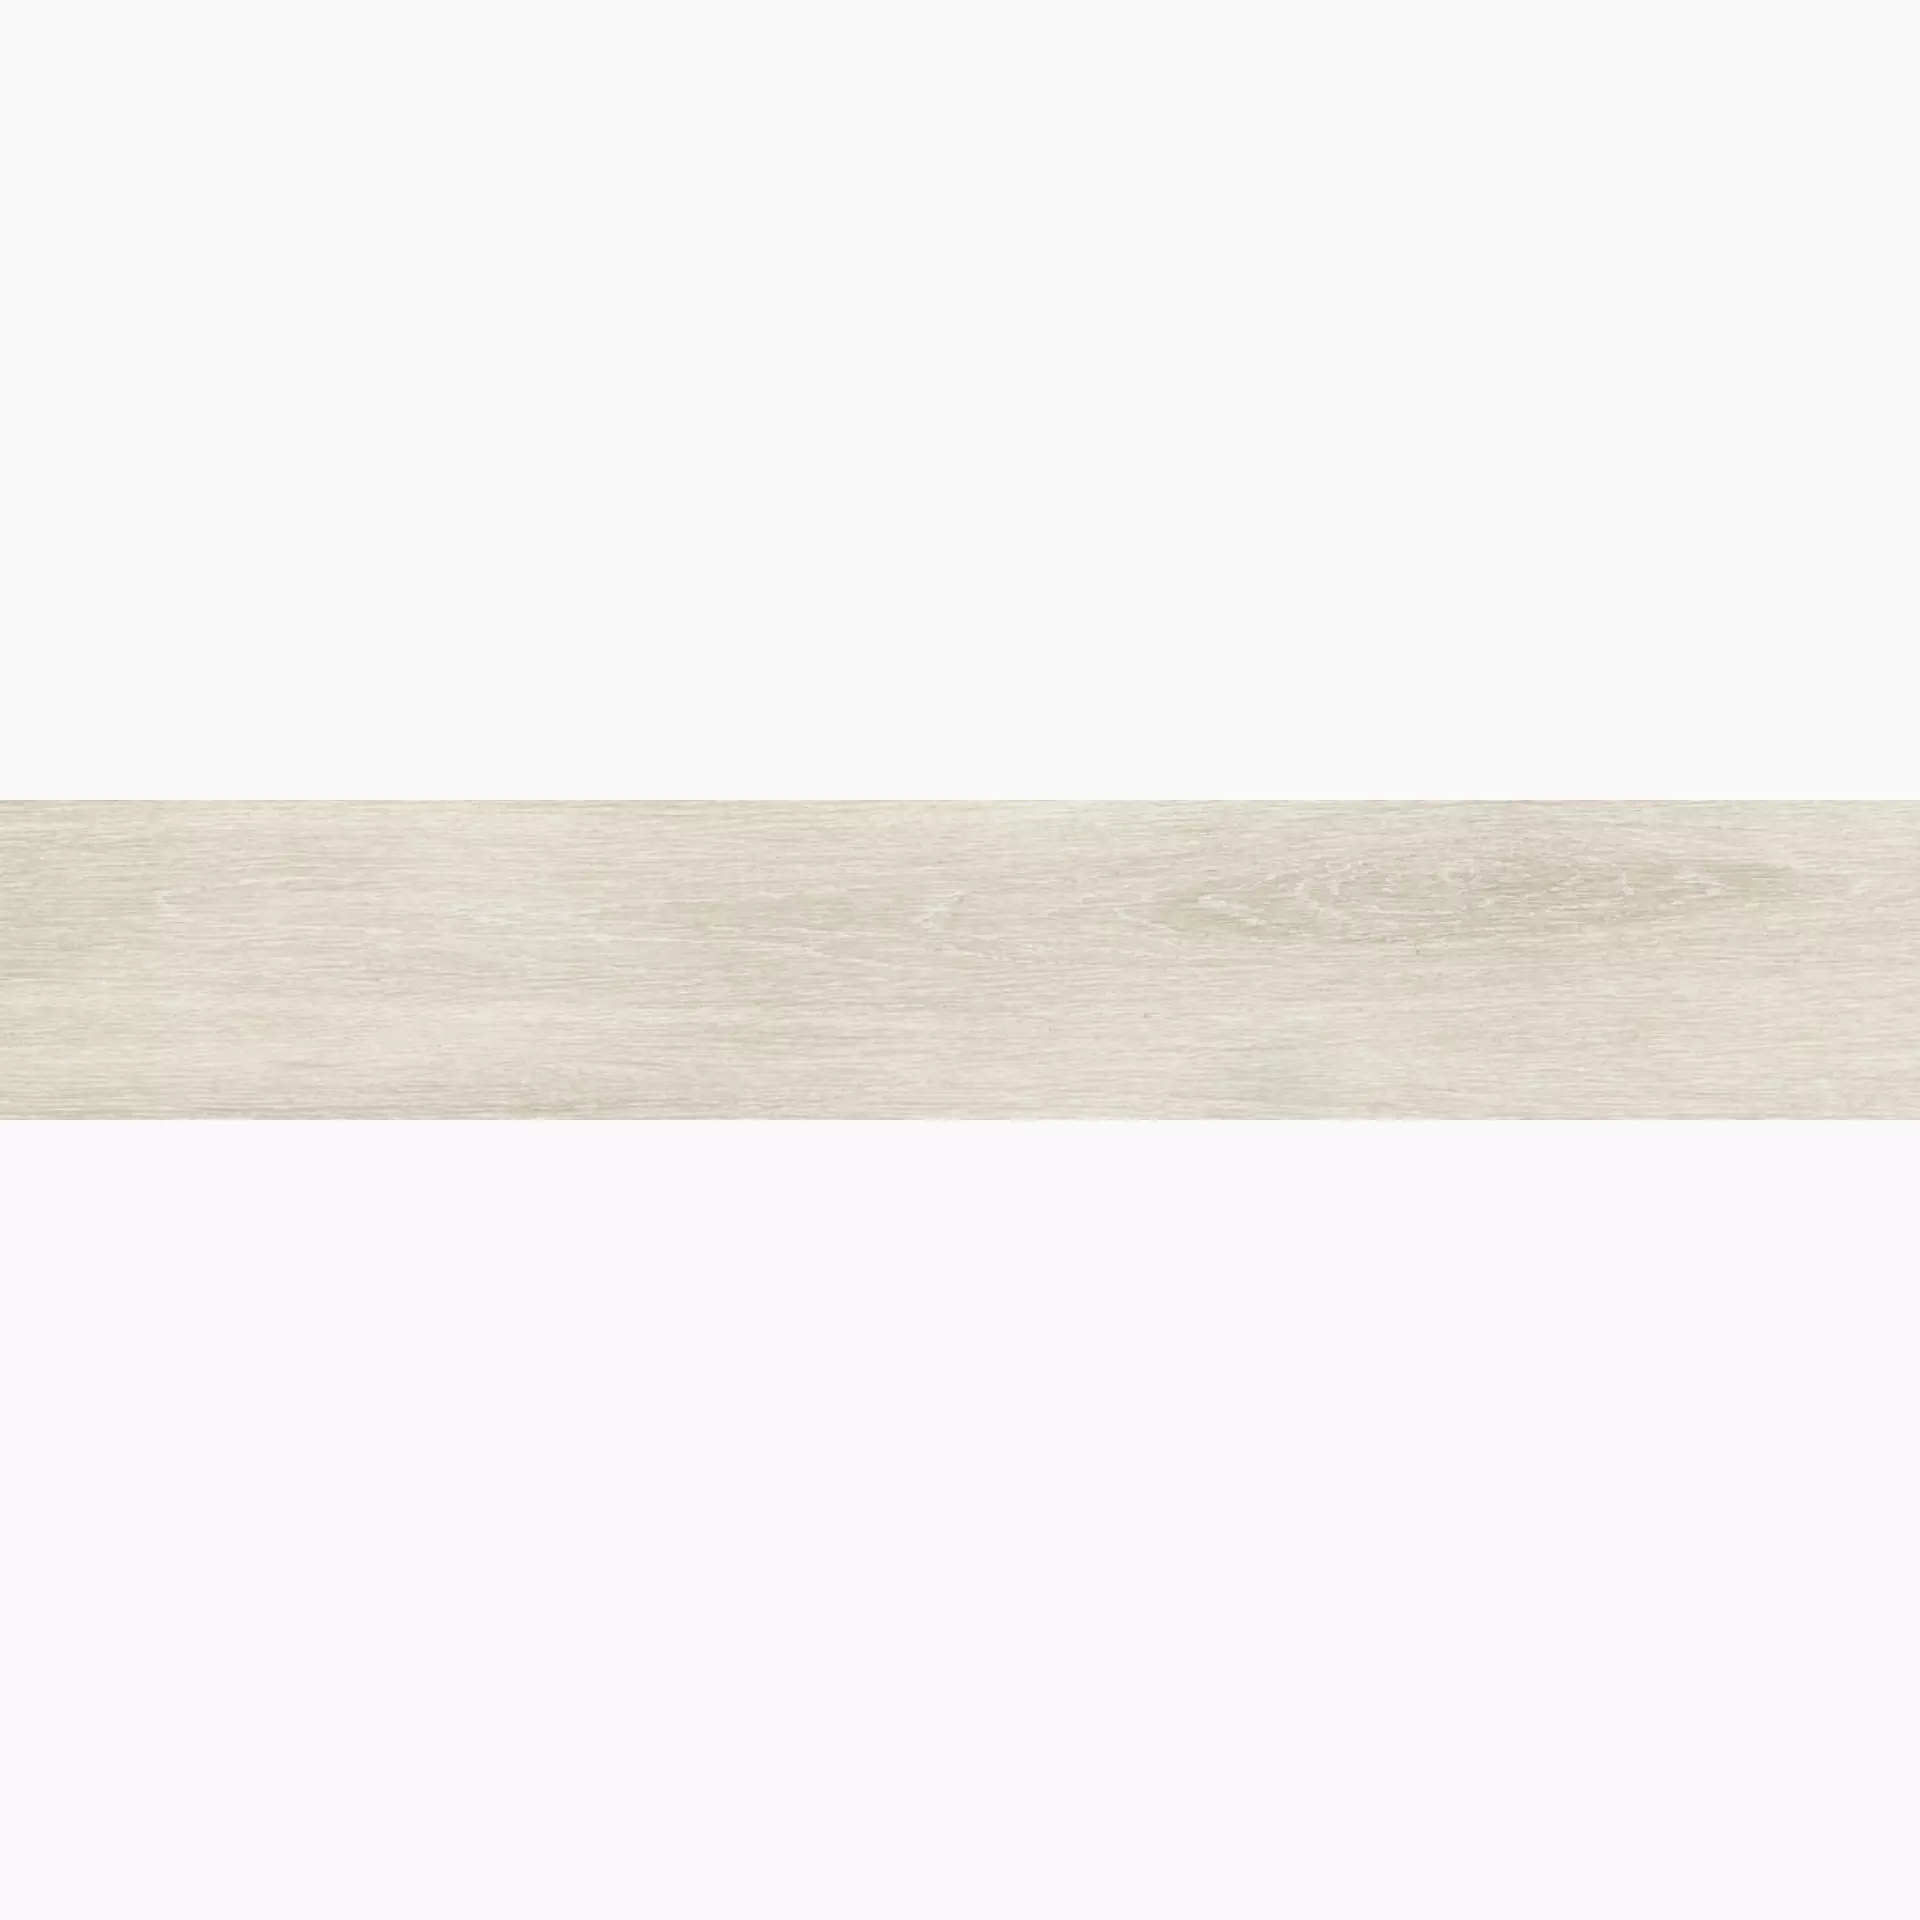 Ergon Tr3Nd Ivory Naturale E415 20x120cm rectified 9,5mm